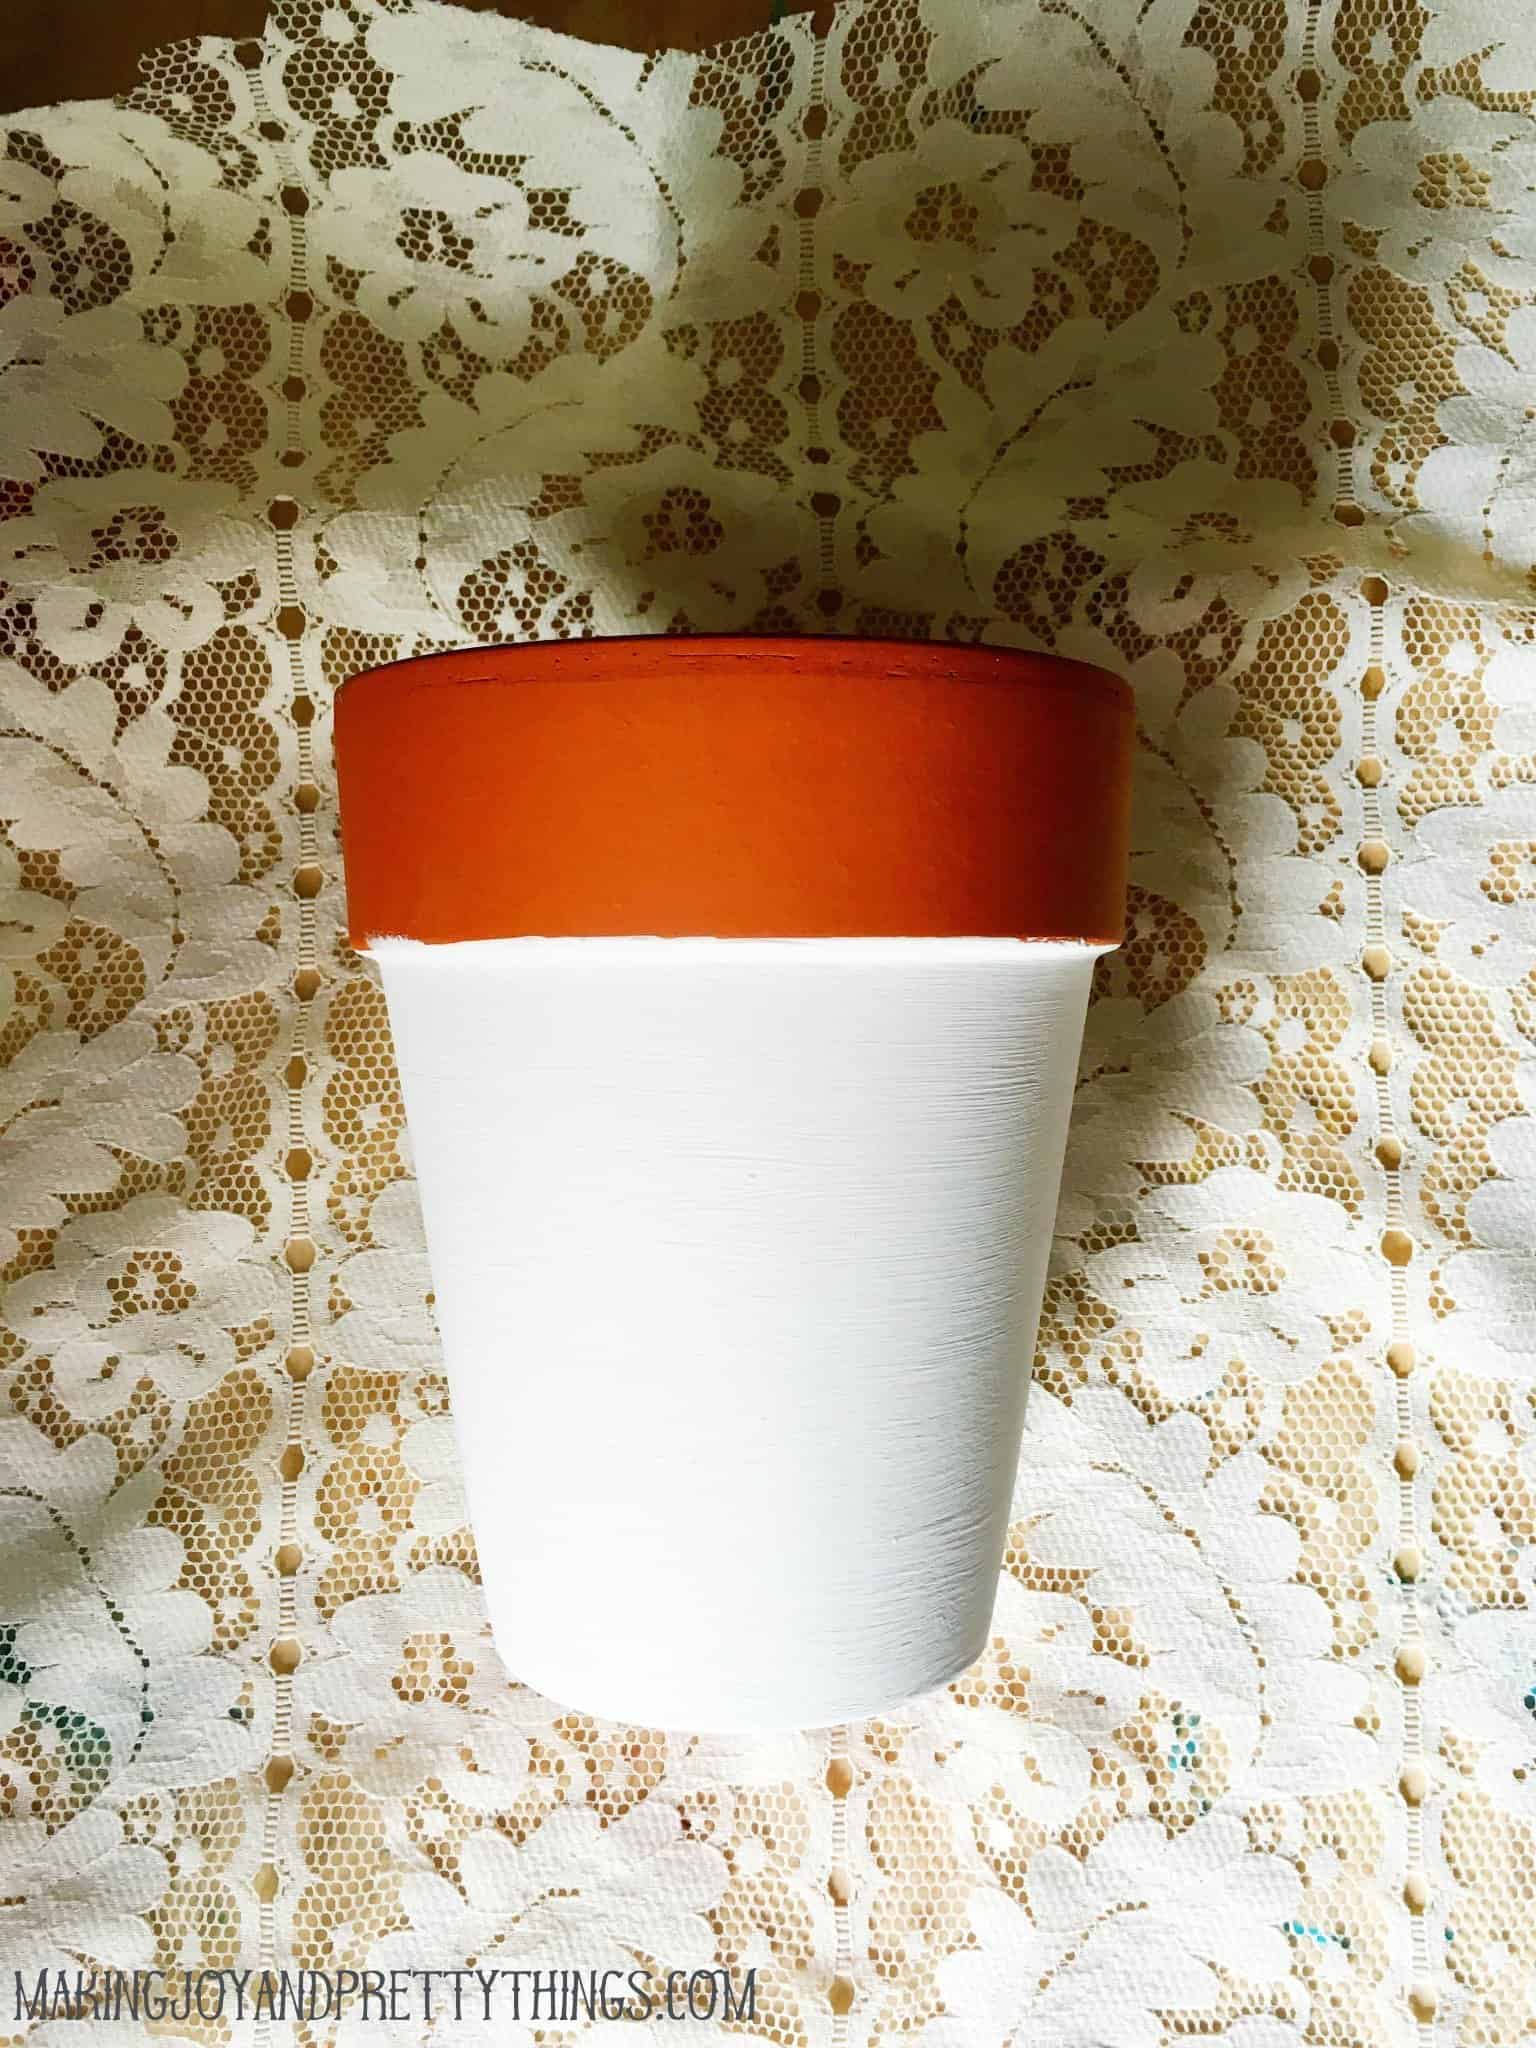 A partially painted terra cotta pot sits on a sheet of white lace fabric.